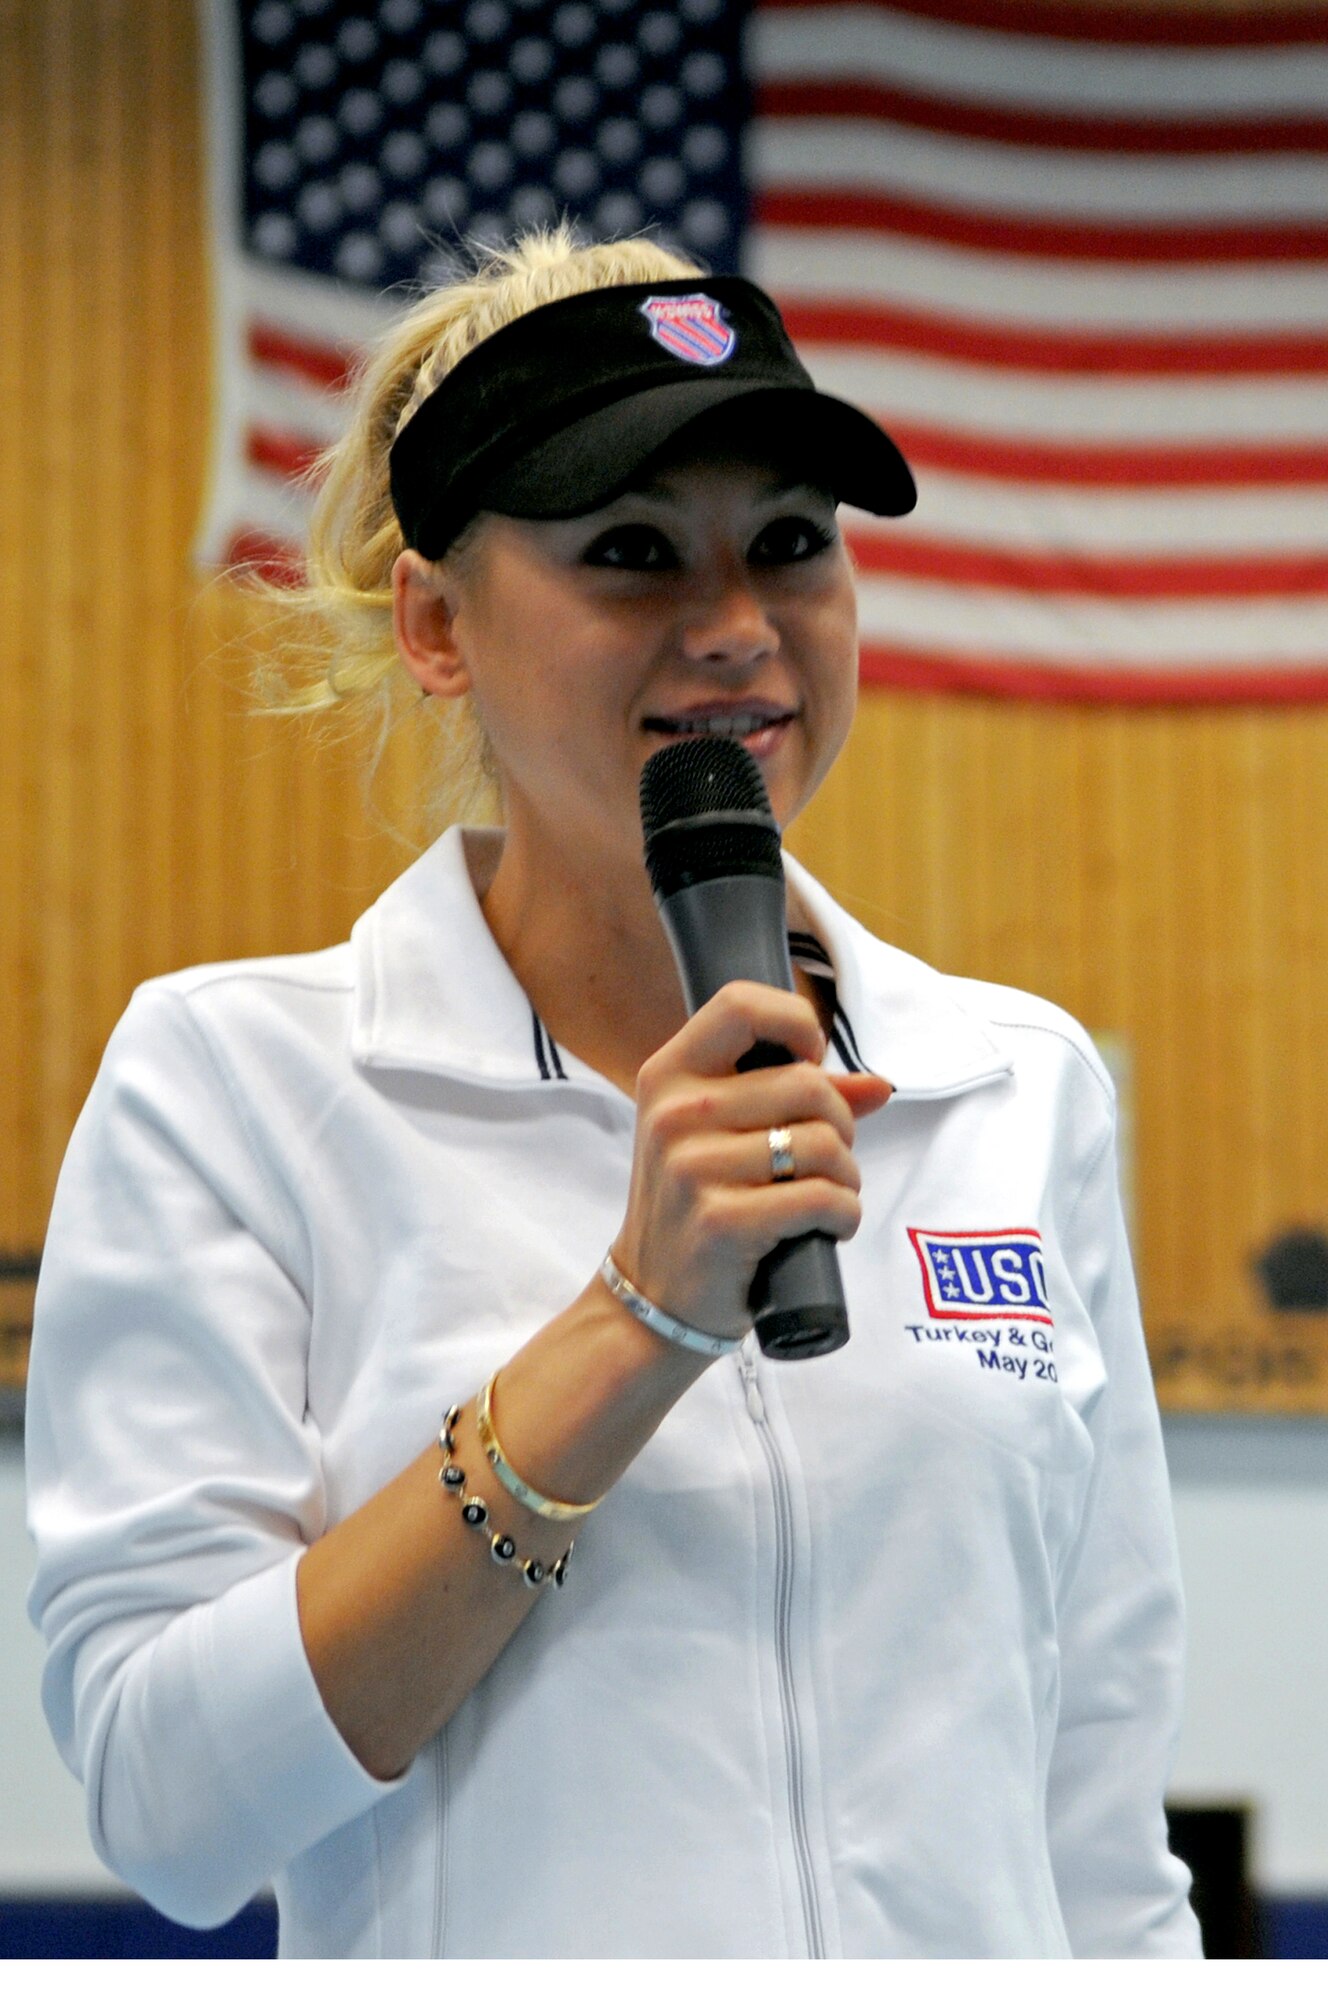 Anna Kournikova, former professional tennis player, talks to students at Ramstein High School, Ramstein Air Base, Germany, May 19, 2009, about school, her tennis career and working hard.  Kournikova visits with students as part of a six-day educational United Service Organizations tour. (U.S. Air Force photo by Airman 1st Class Grovert Fuentes-Contreras)